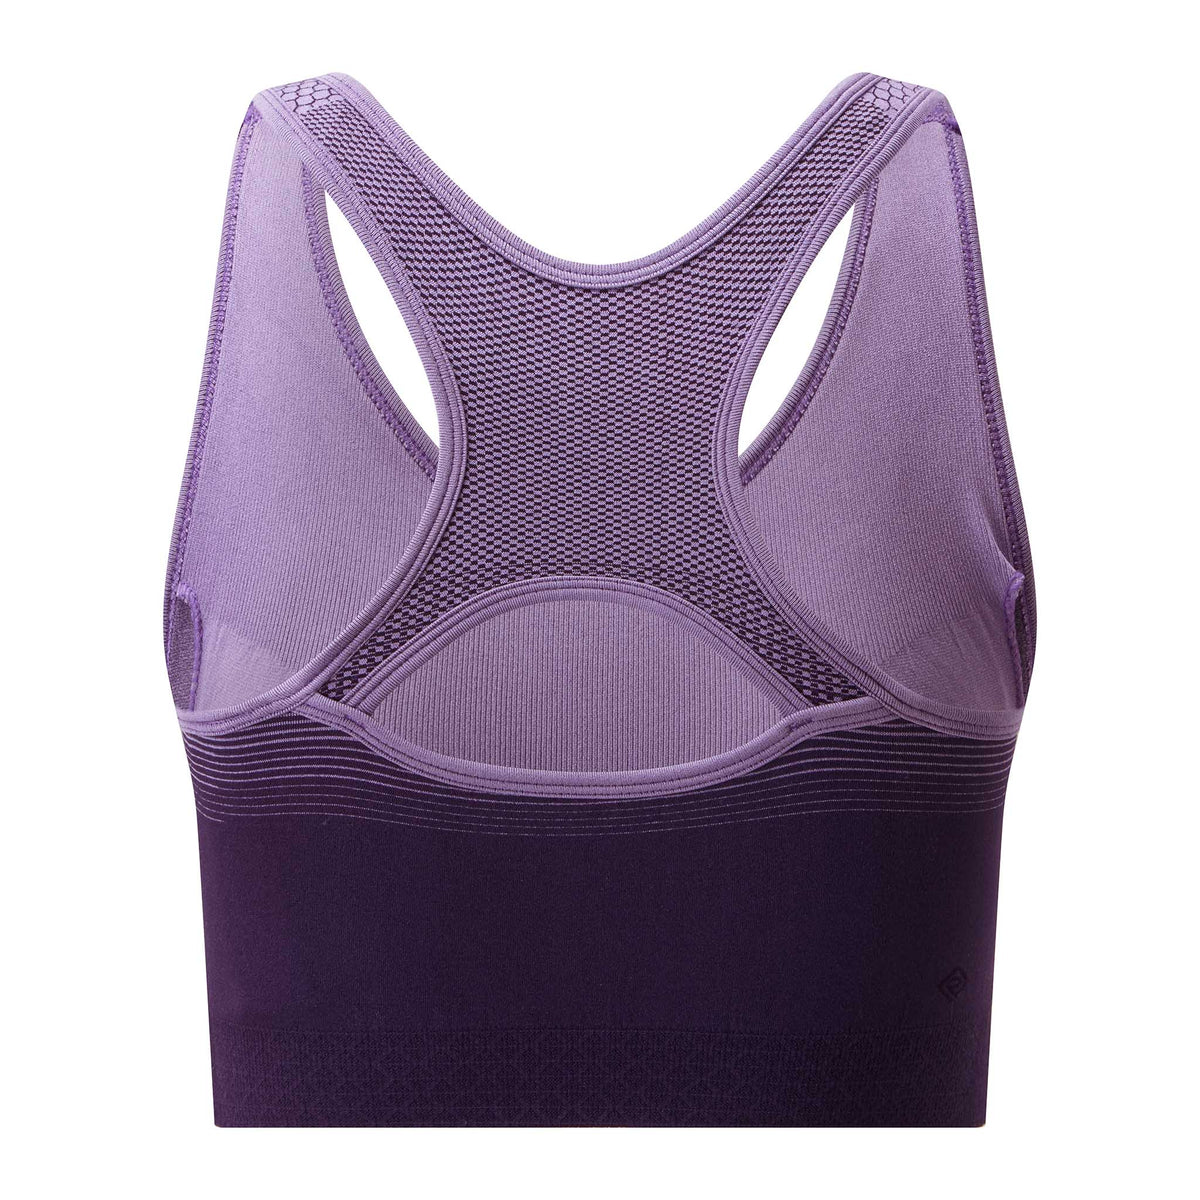 Ronhill Womens Seamless Bra: Ultraviolet/Imperial